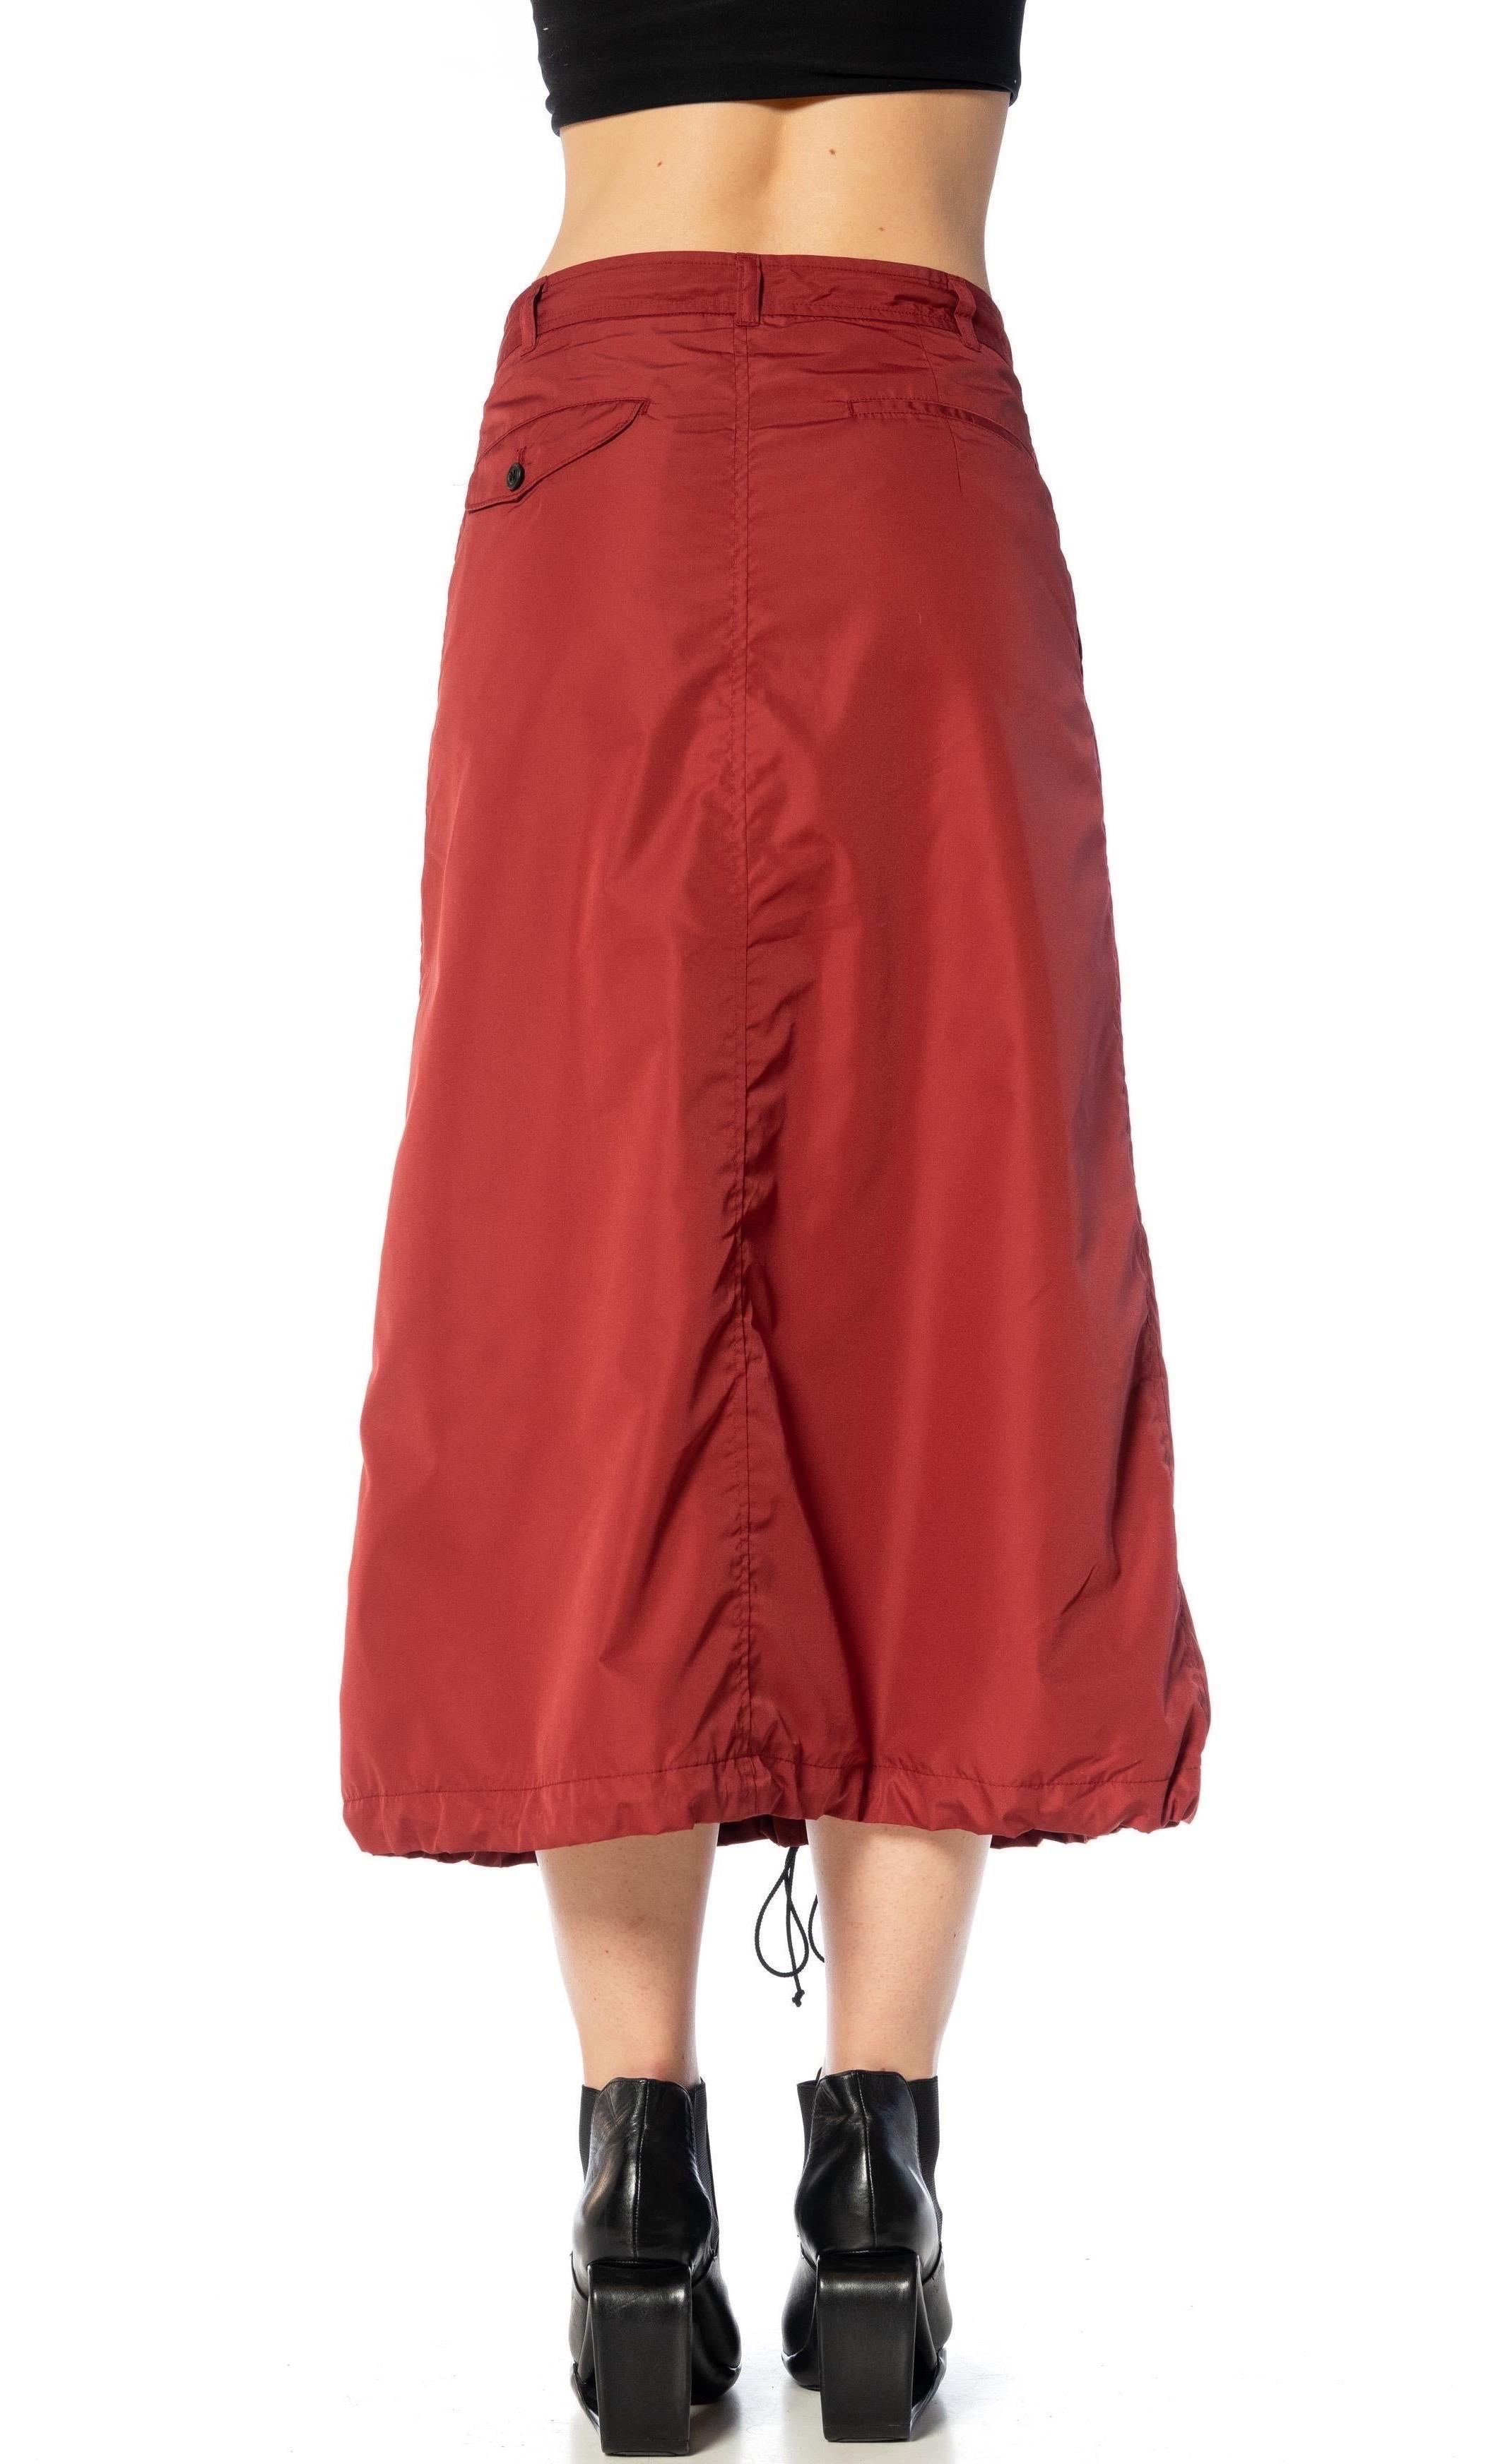 2000S COMME DES GARCONS Burgundy Polyester Parachute Skirt With Drawstring Hem  For Sale 3